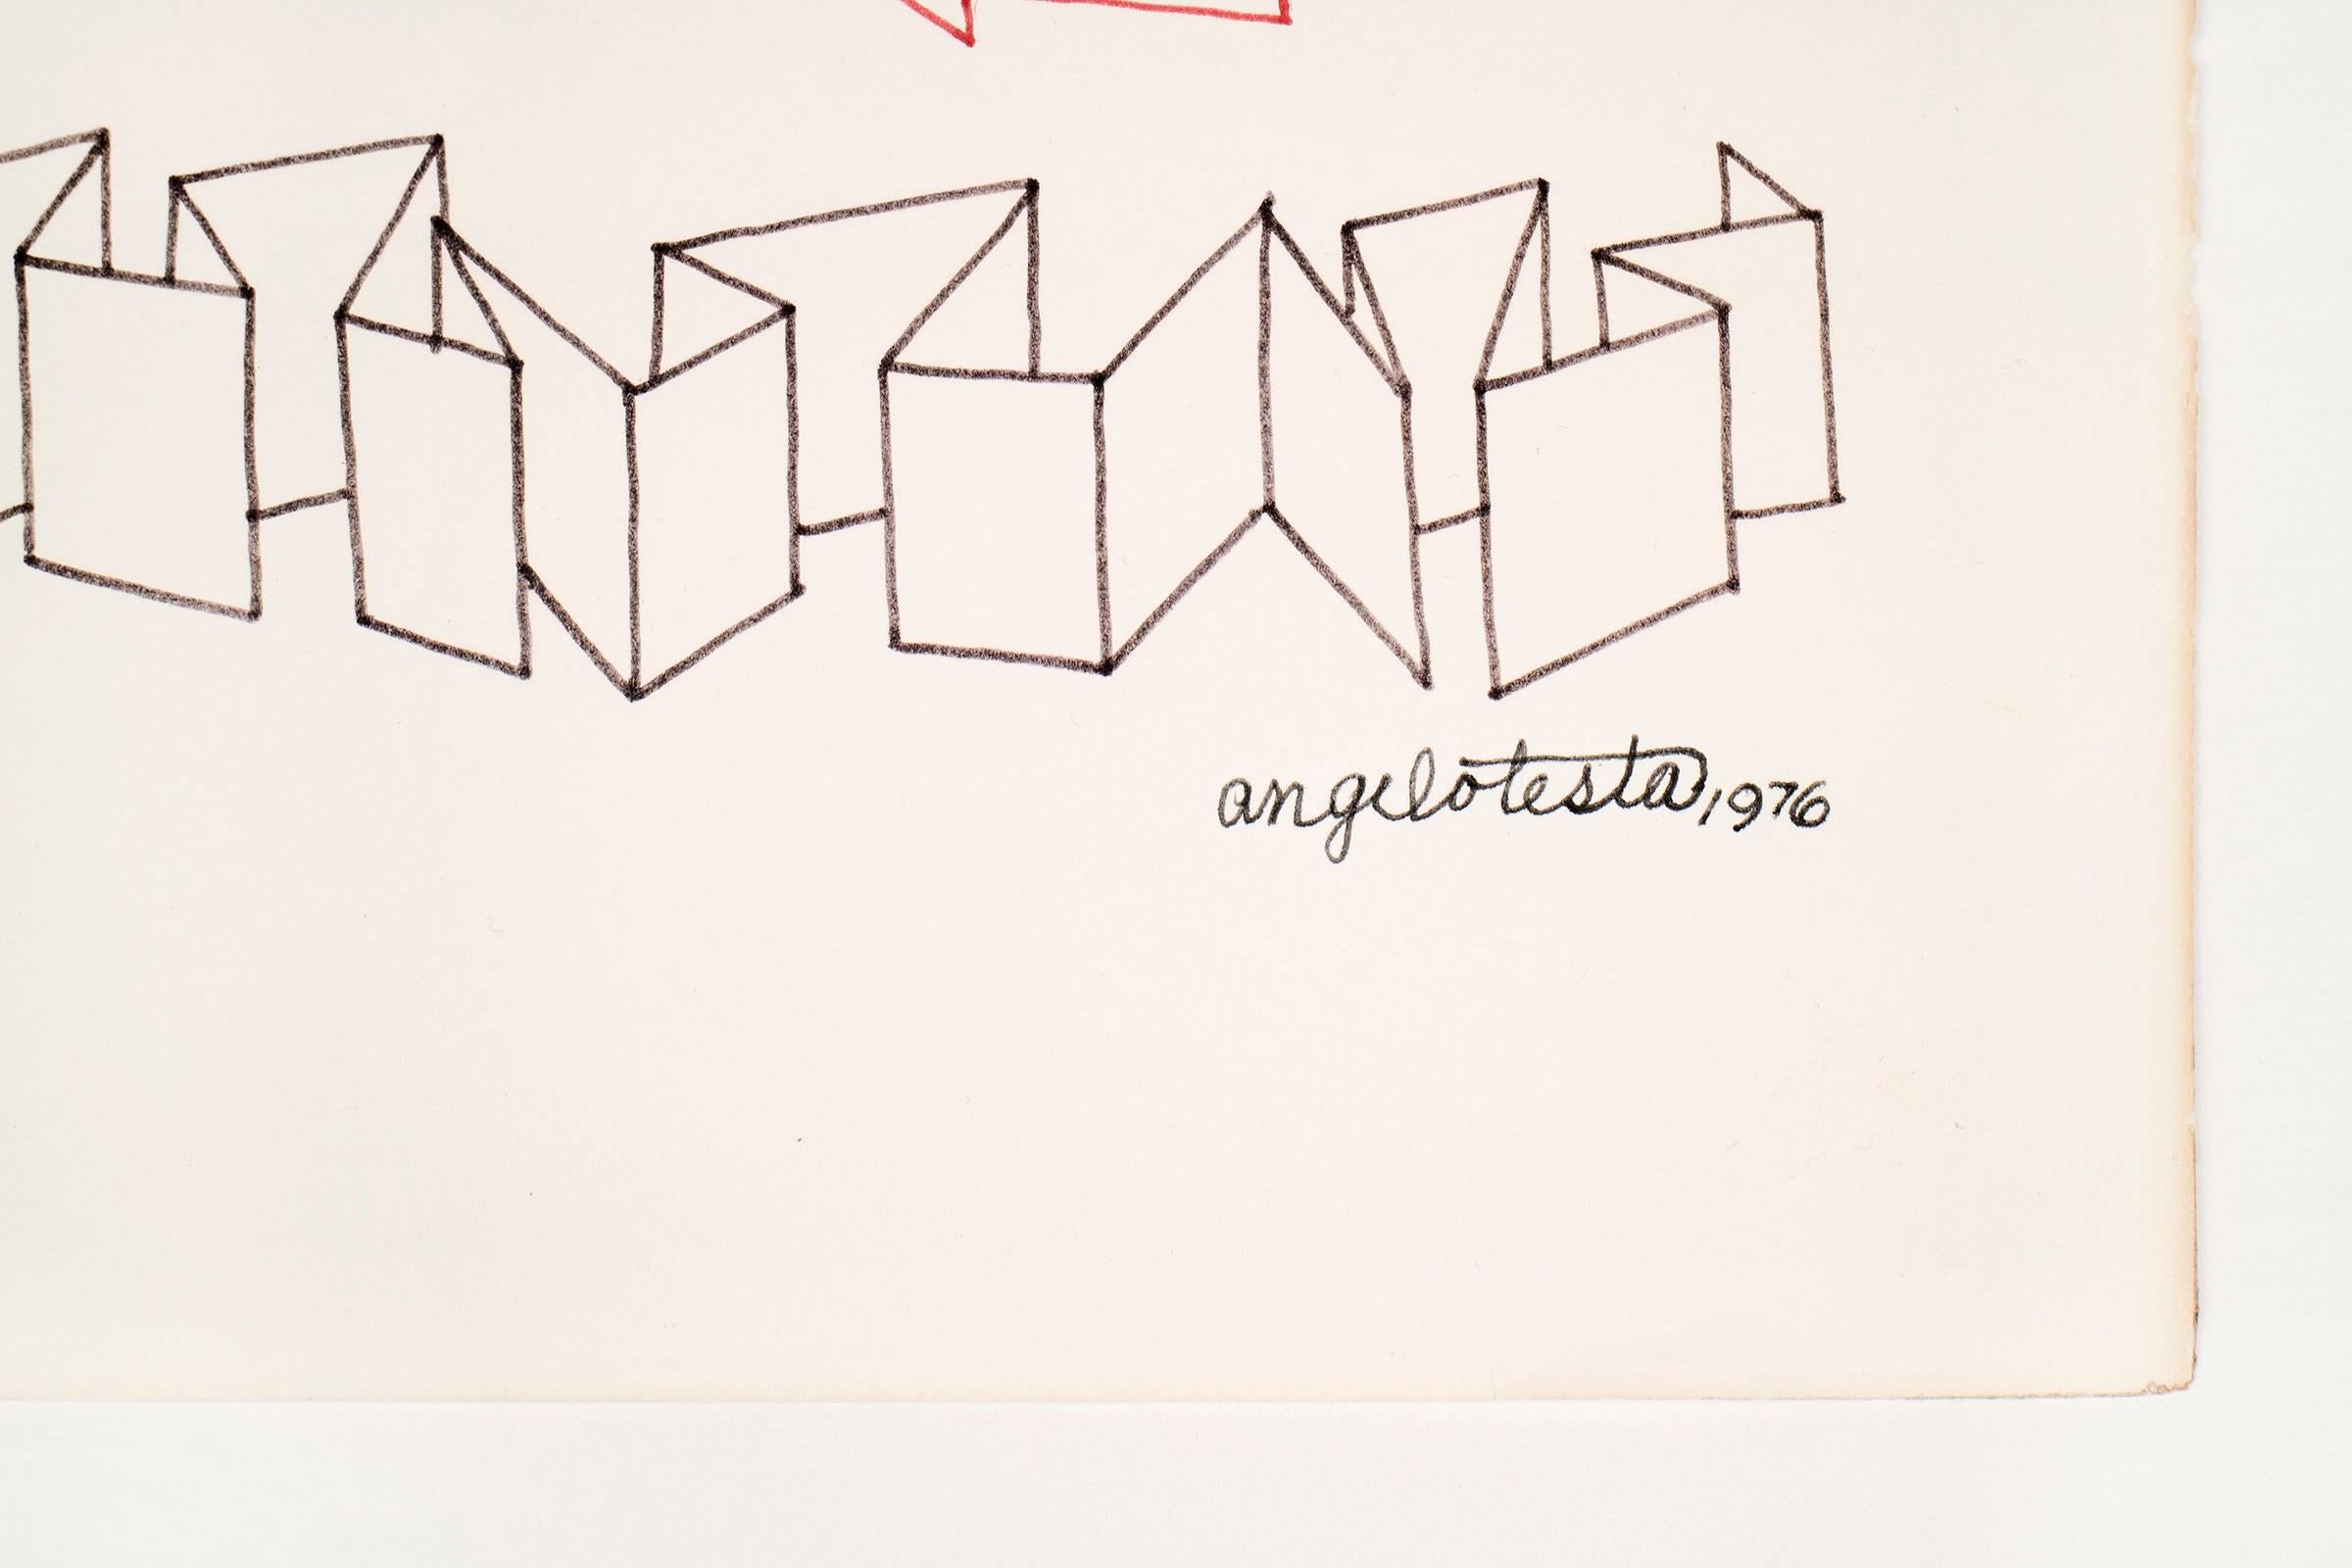 Angelo Testa print. Ink on paper. Signed and dated; [Paper Ballots Angelo Testa 1976].

Angelo Testa was an American textile designer who became the first graduate of the Institute of Design in Chicago in 1945. Tesla known for his designs also